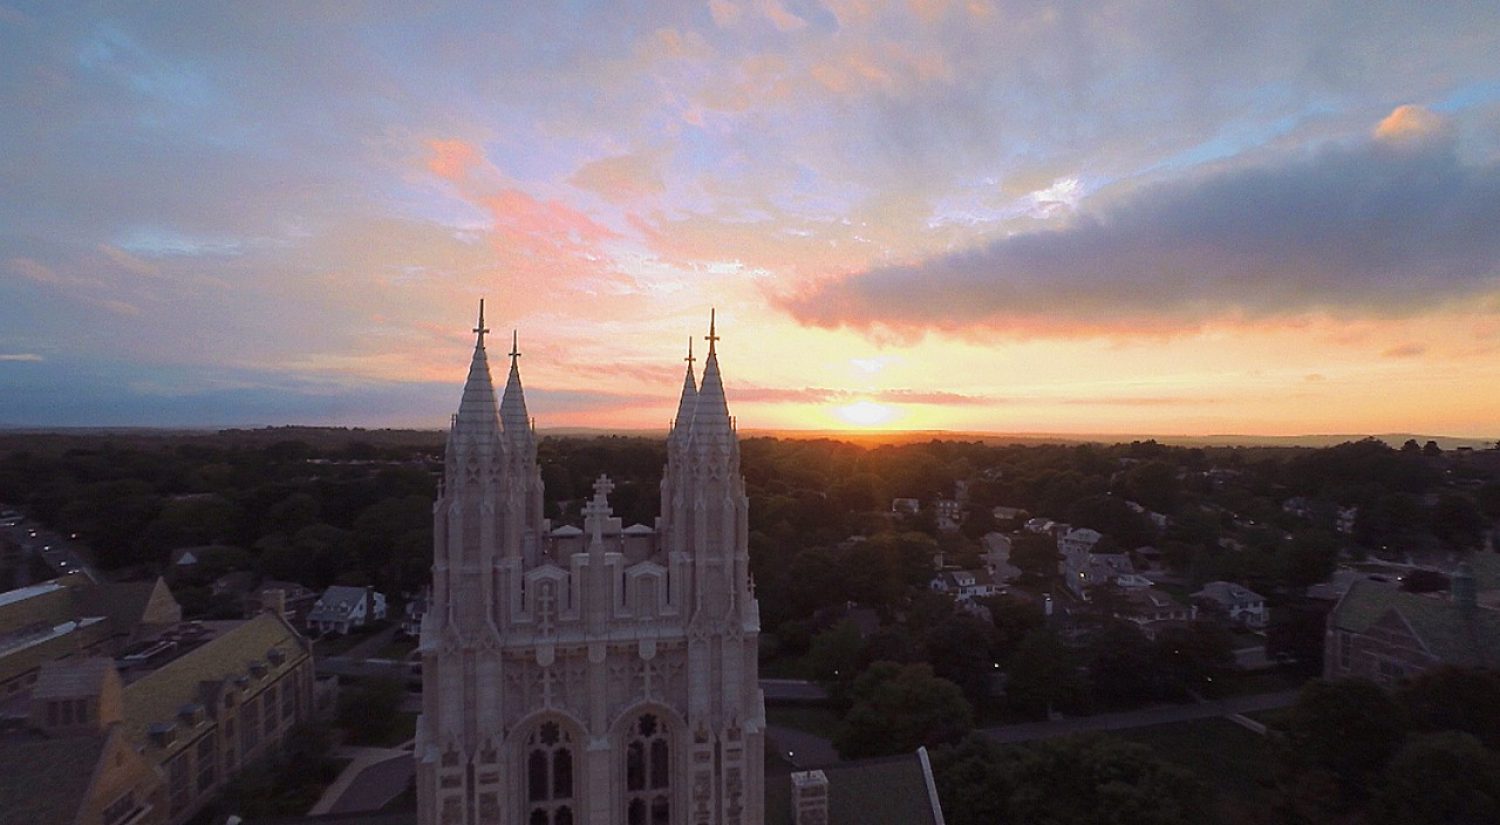 Gasson tower at sunset